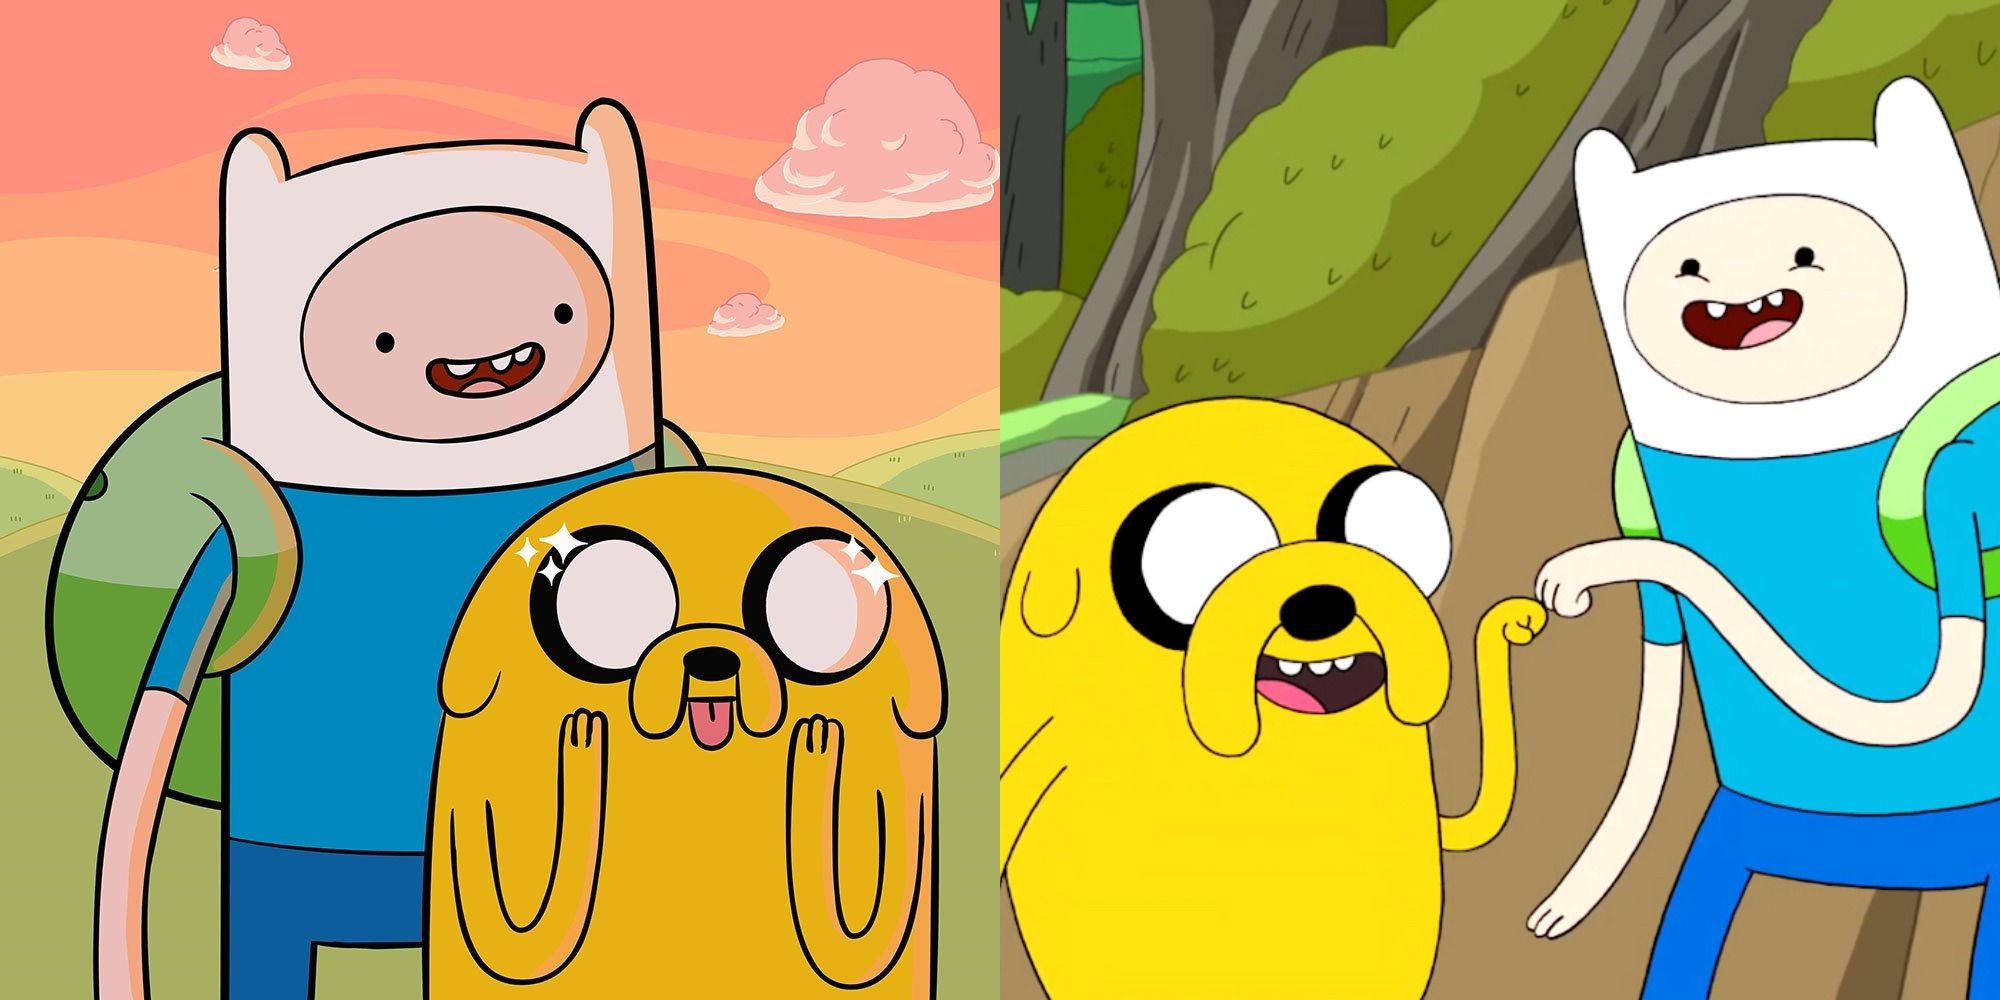 Two side by side images of Finn and Jake in Adventure Time